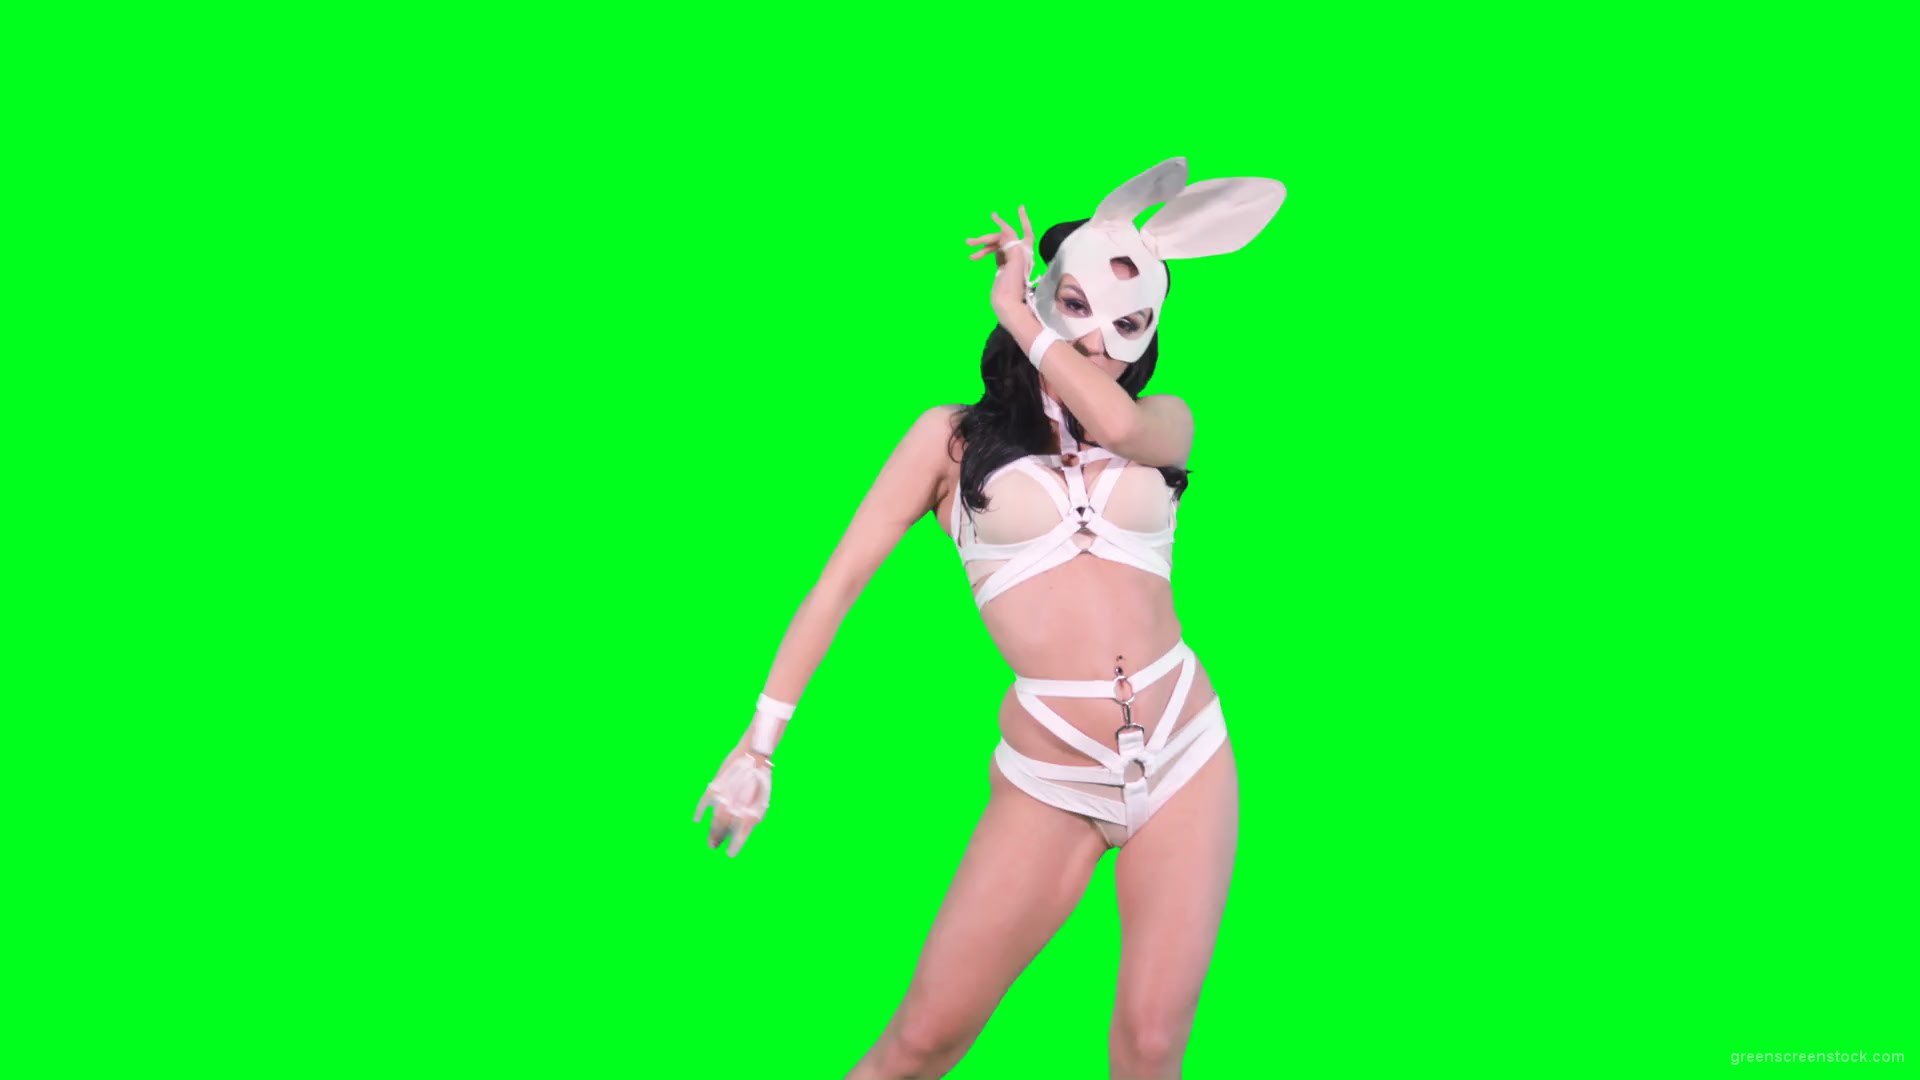 Sexy-bunny-girl-in-rabbit-costume-on-green-screen-4K-Video-Footage-1920_001 Green Screen Stock